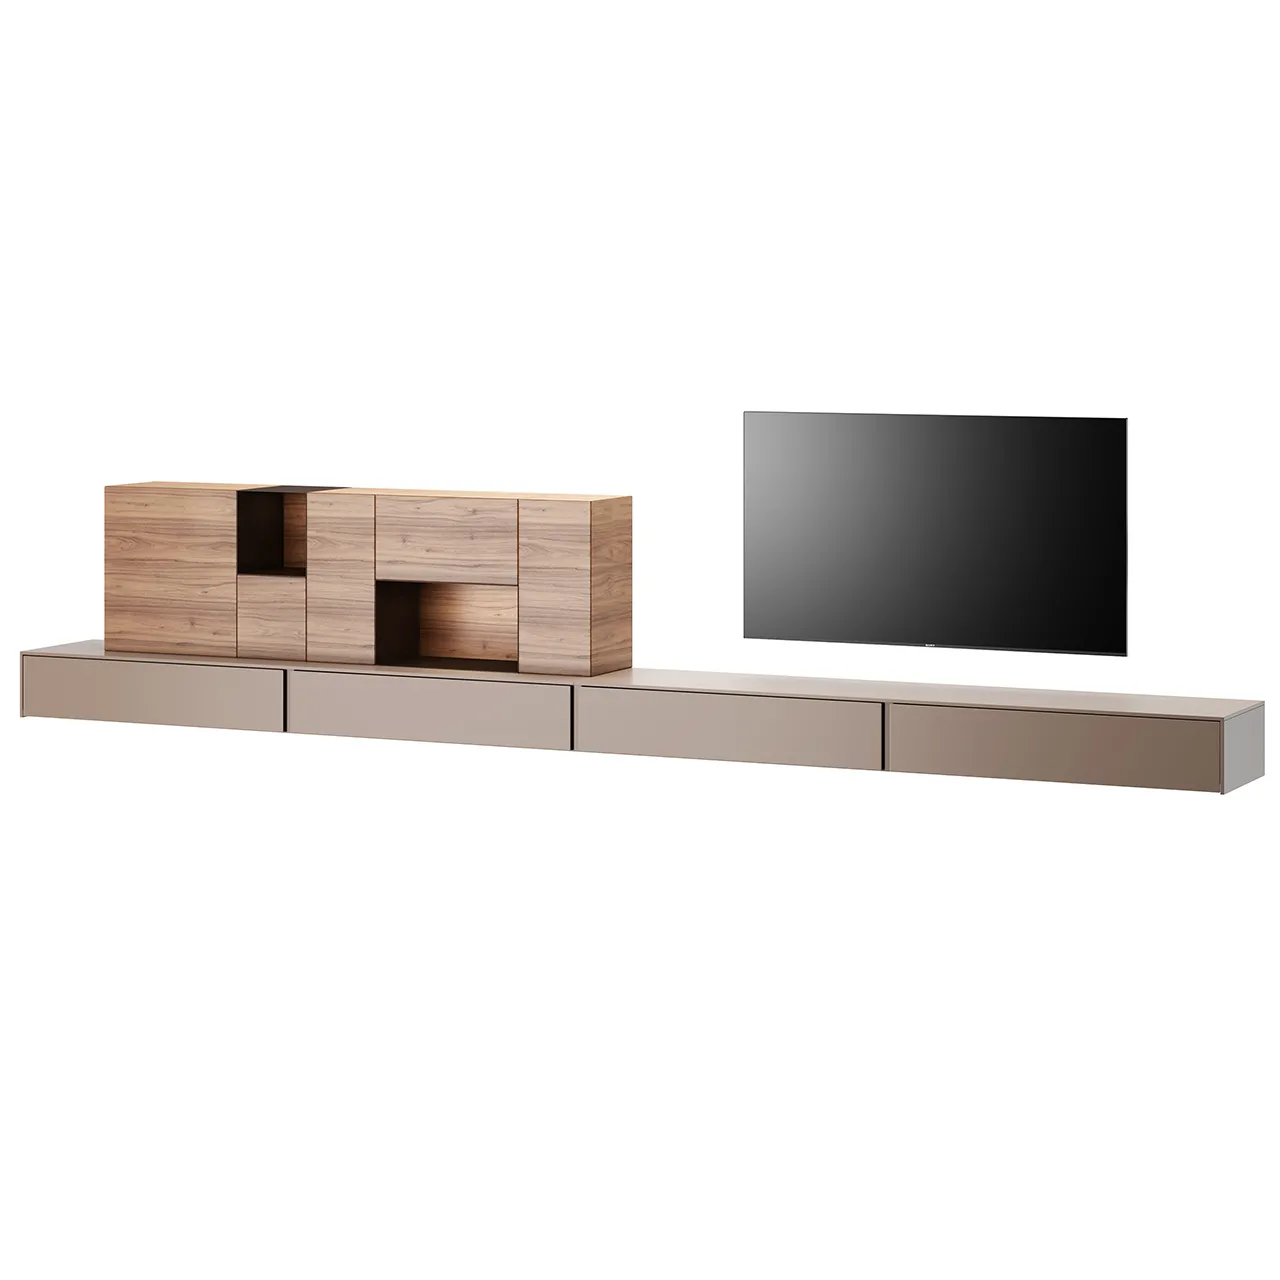 Furniture – avenue-suspended-tv-stand-480-l-by-md-house